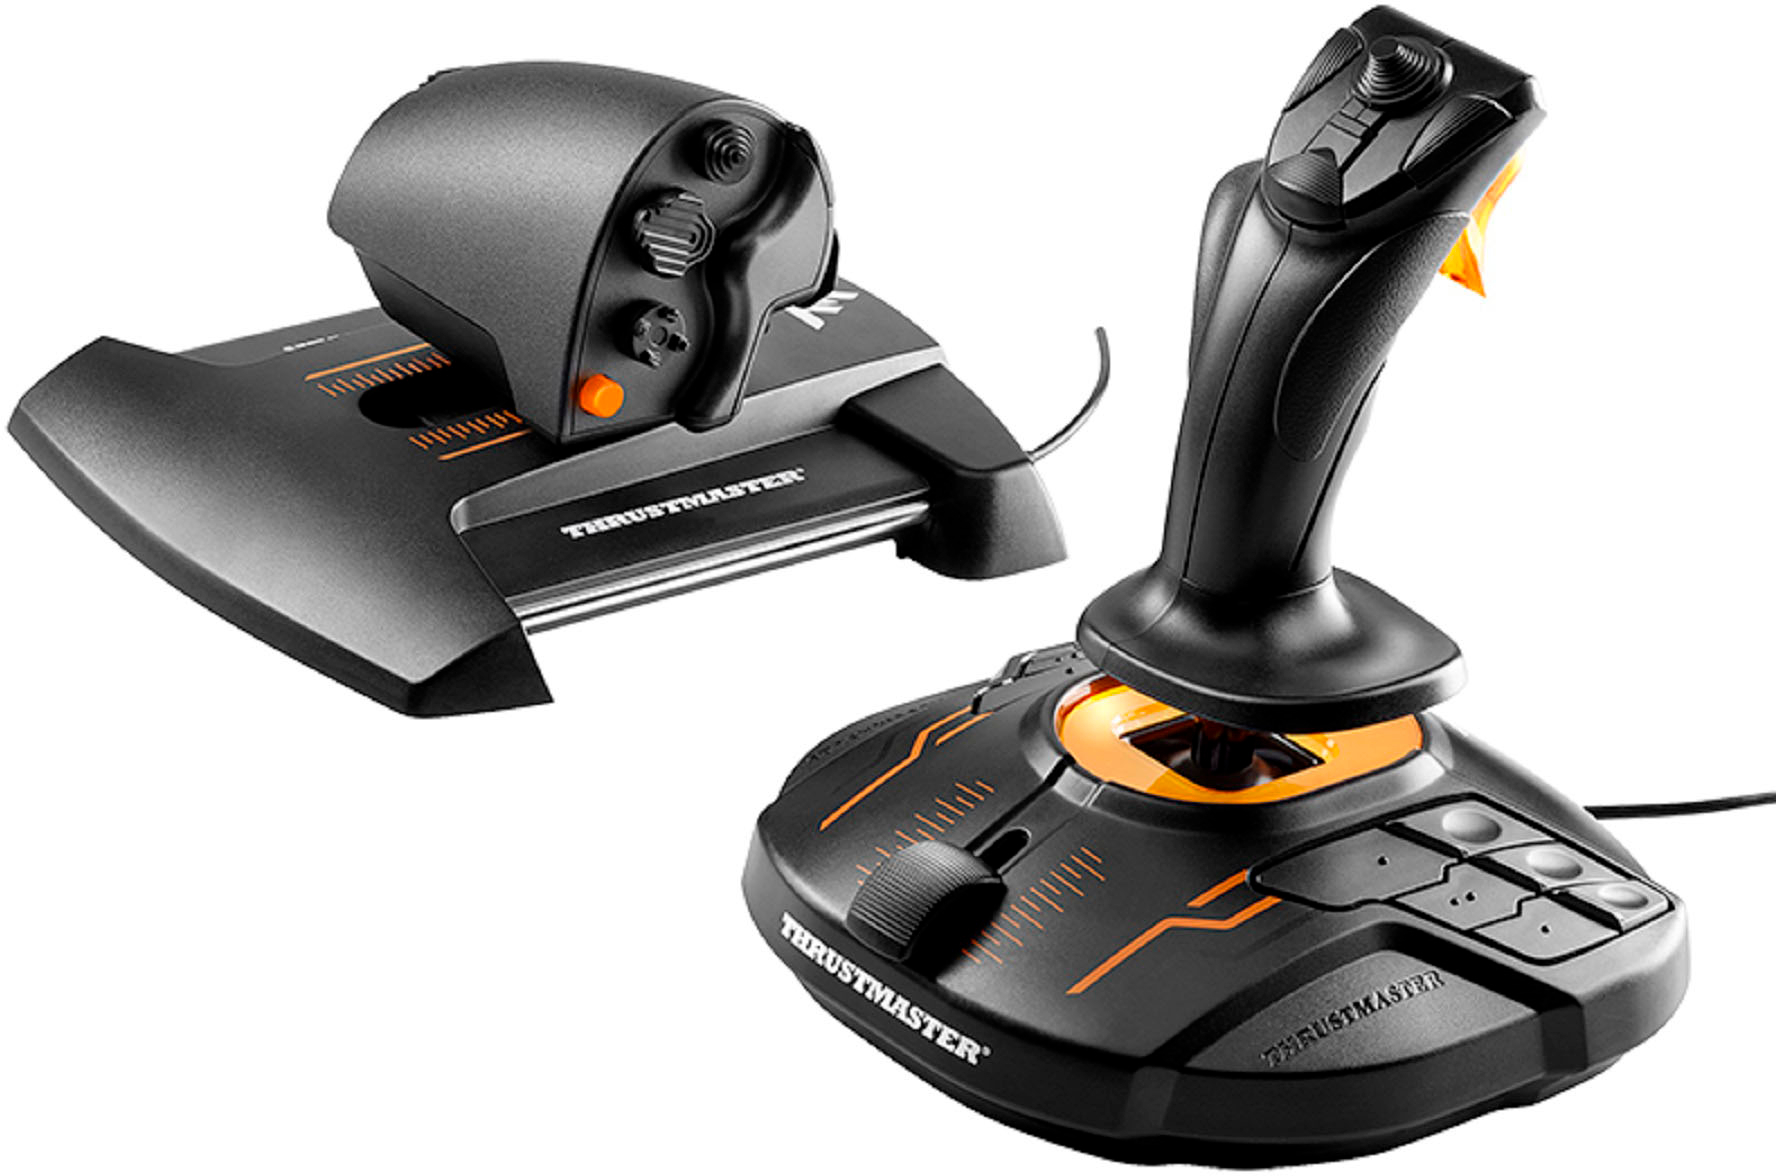 Thrustmaster T16000M FCS HOTAS for PC Black - Best Buy